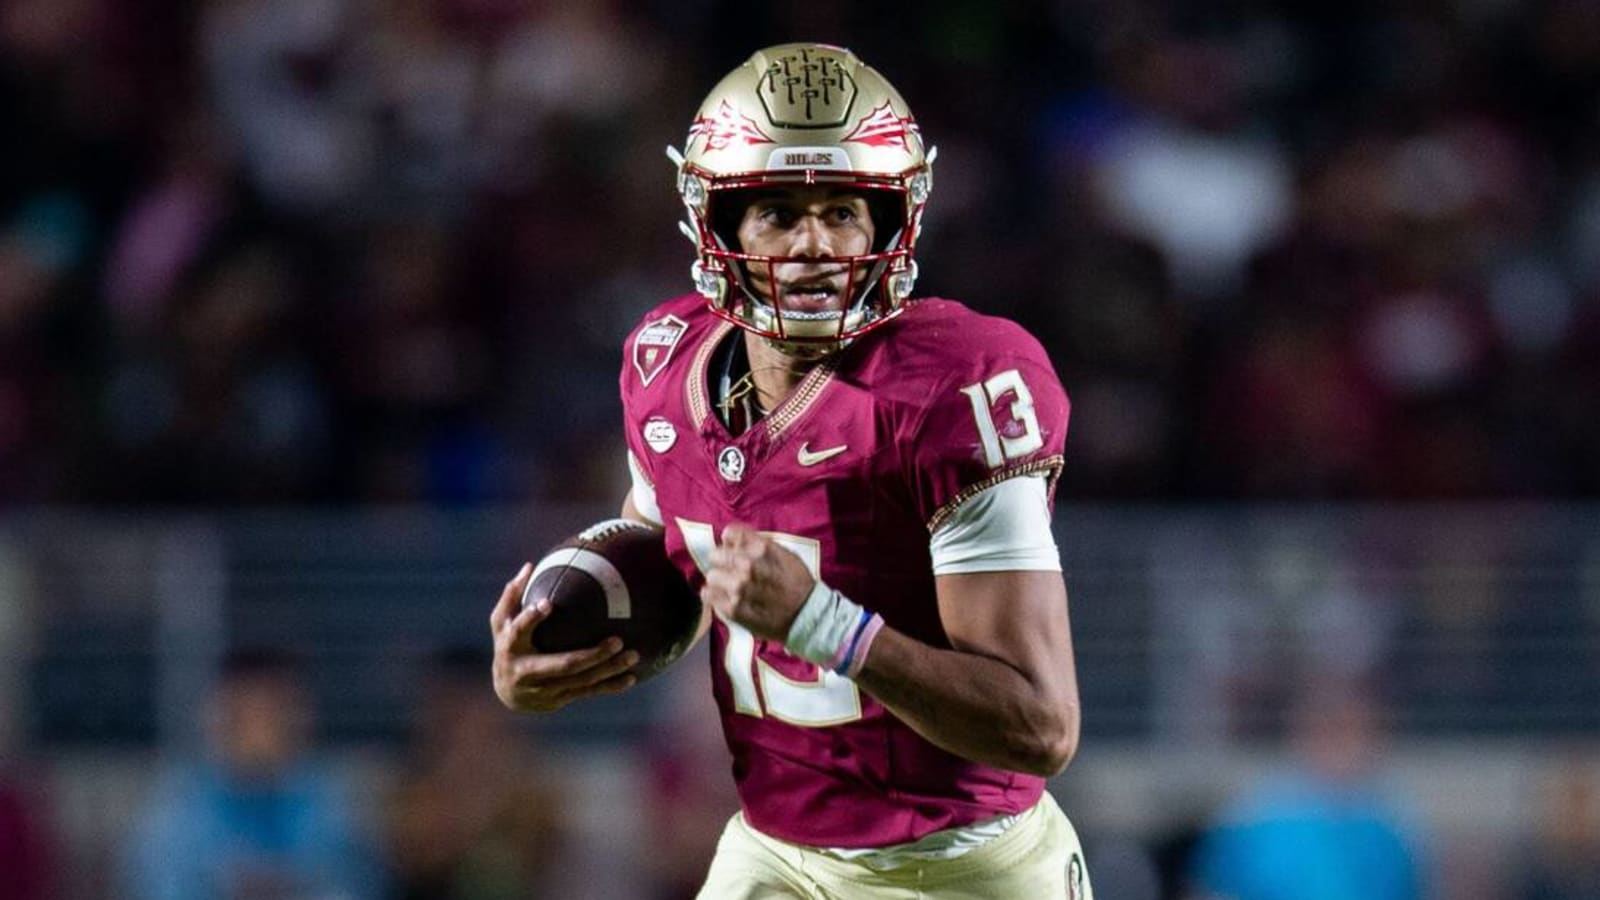 Florida State's Travis makes announcement following his injury